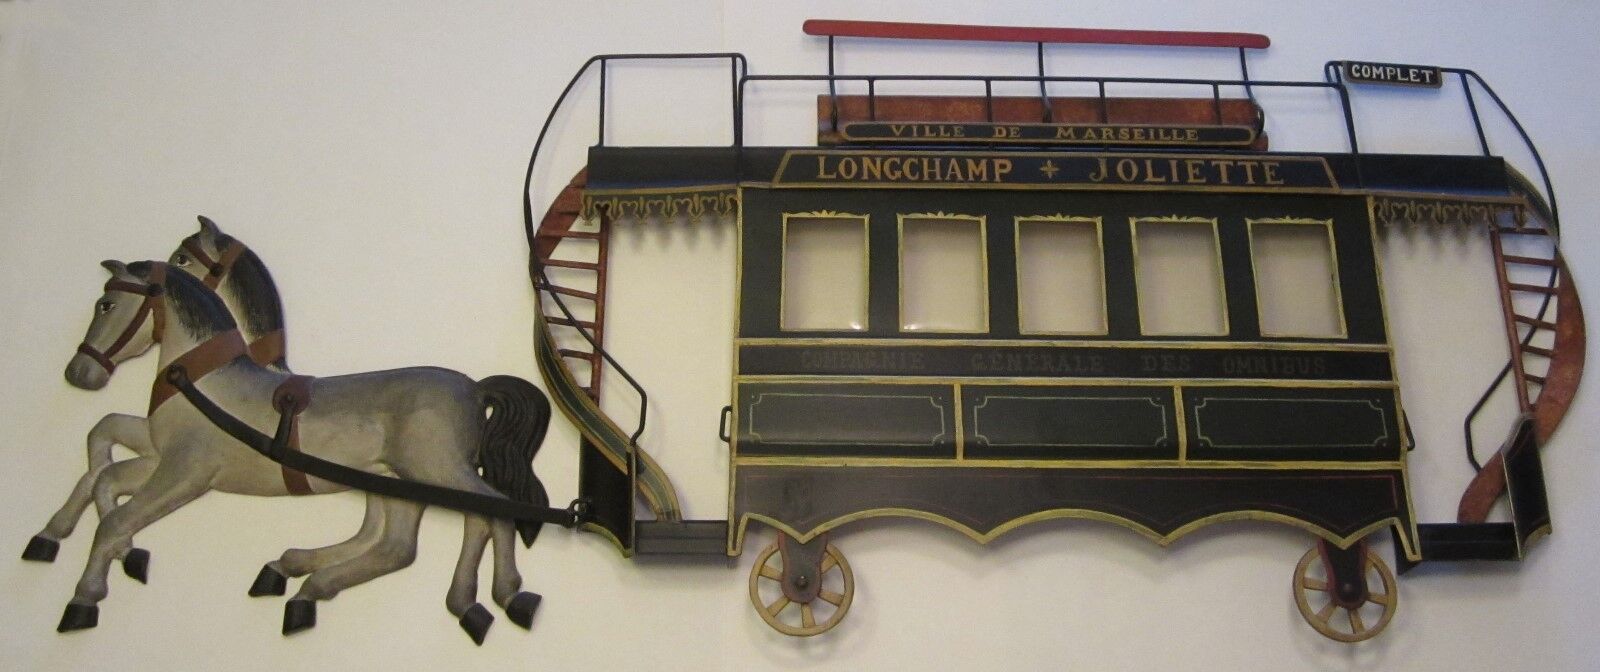 Vtg Horse Drawn Trolley Wall Metal Toleware Paris Cafe French Country Decor 41\